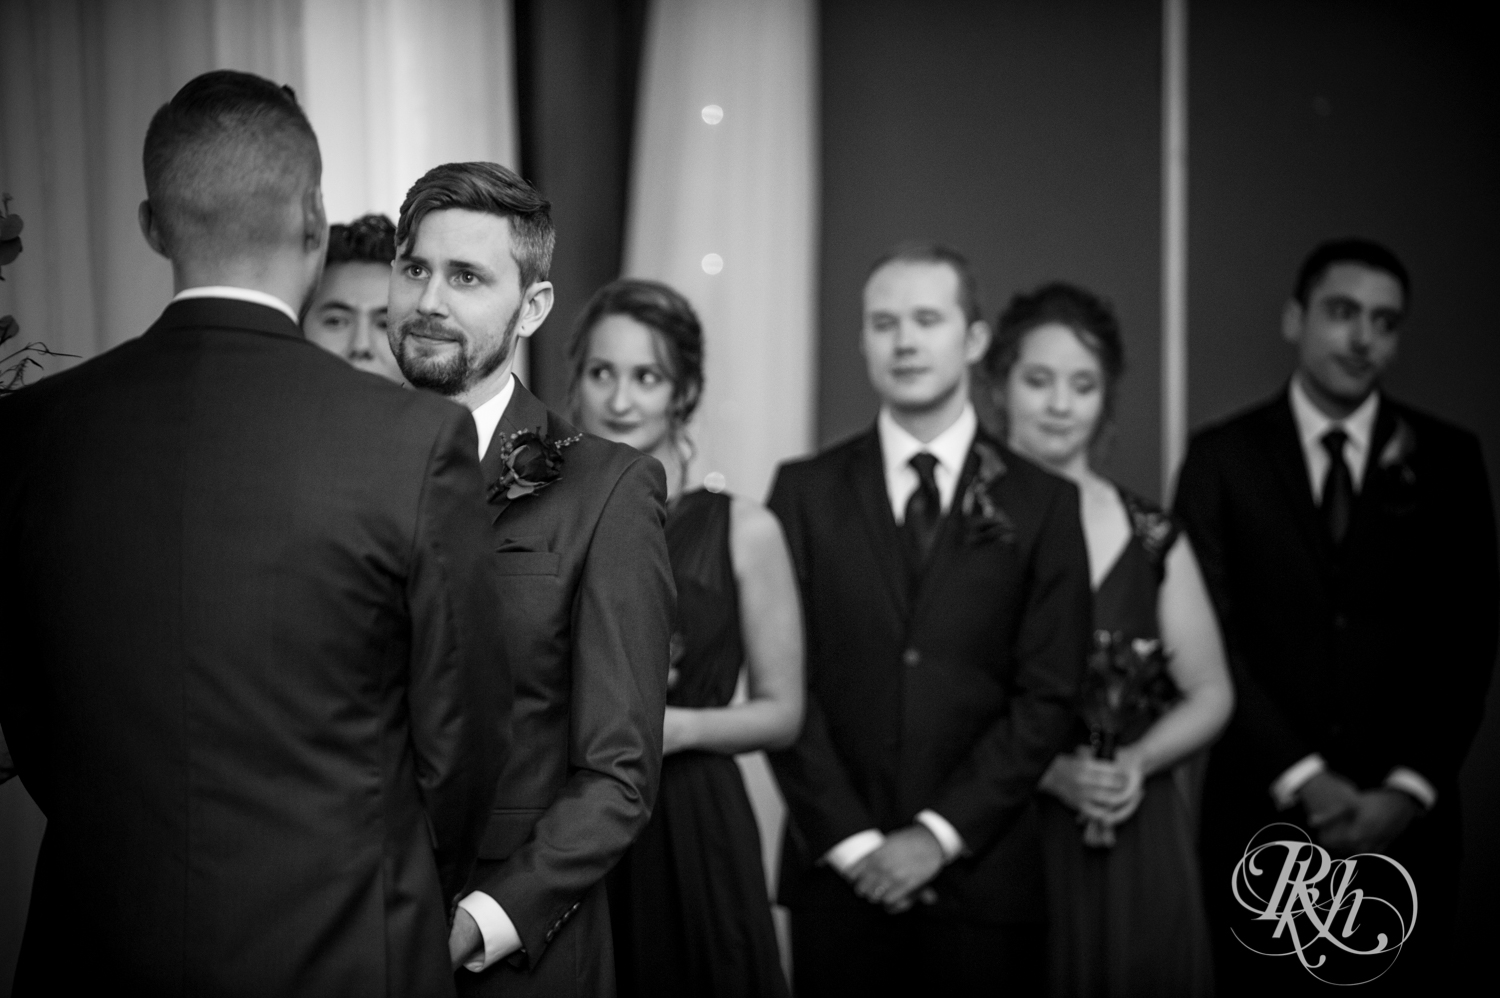 Grooms cry during LGBTQ wedding ceremony at Courtyard by Marriott Minneapolis.